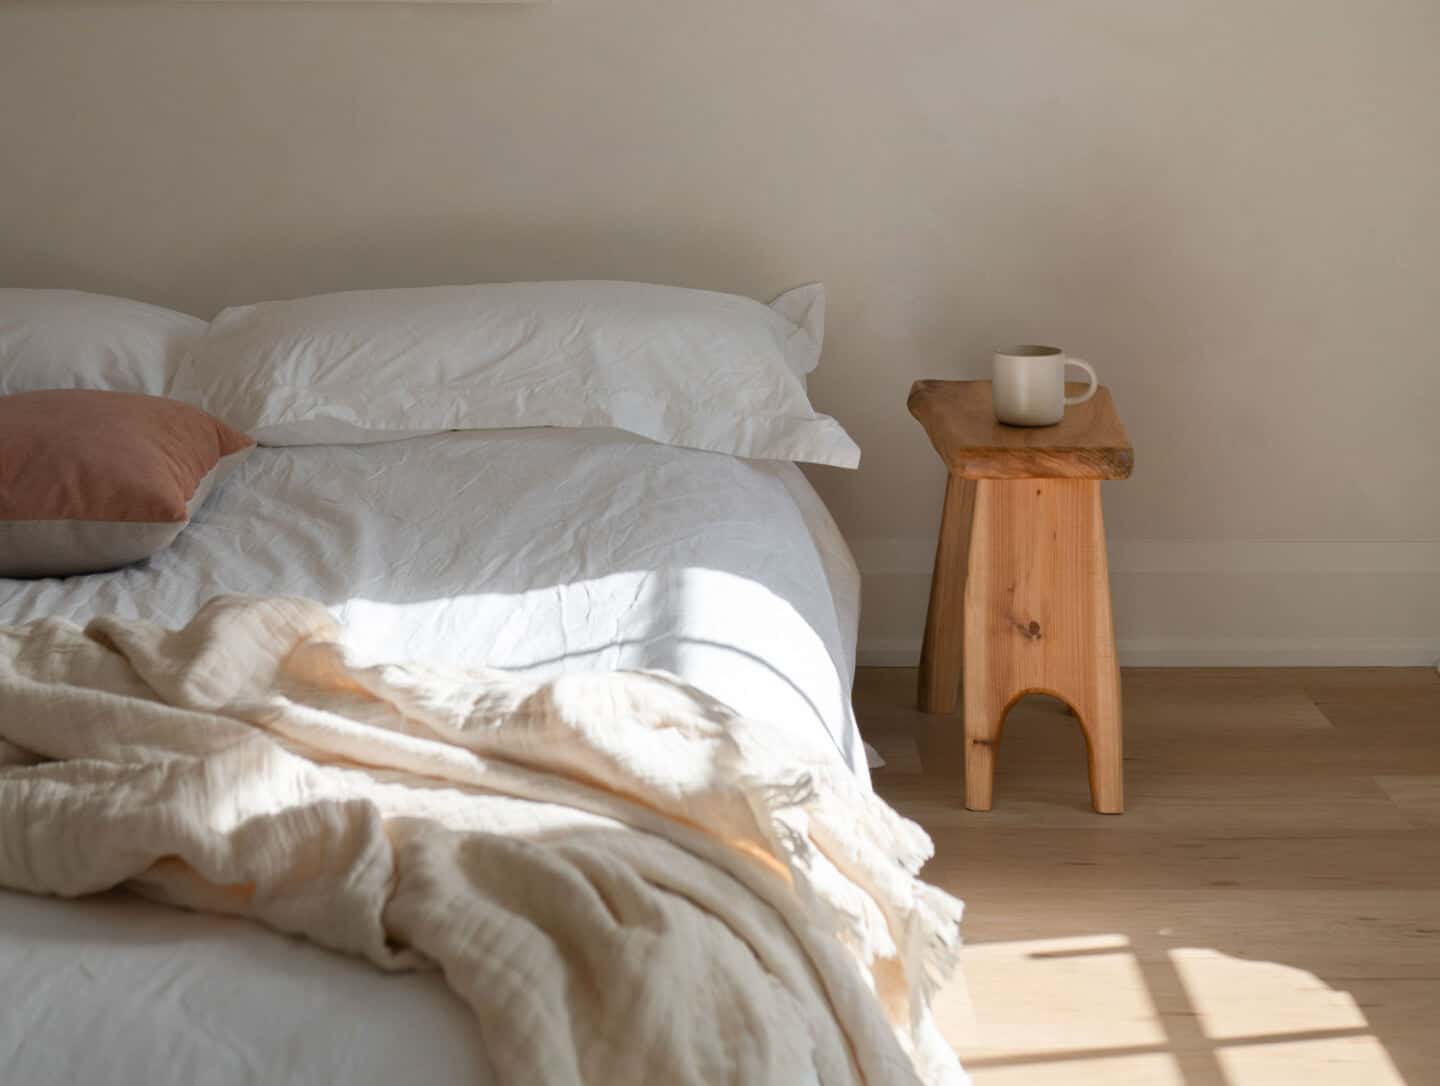 A bed with no headboard covered in linen bedding with a wooden stool beside.